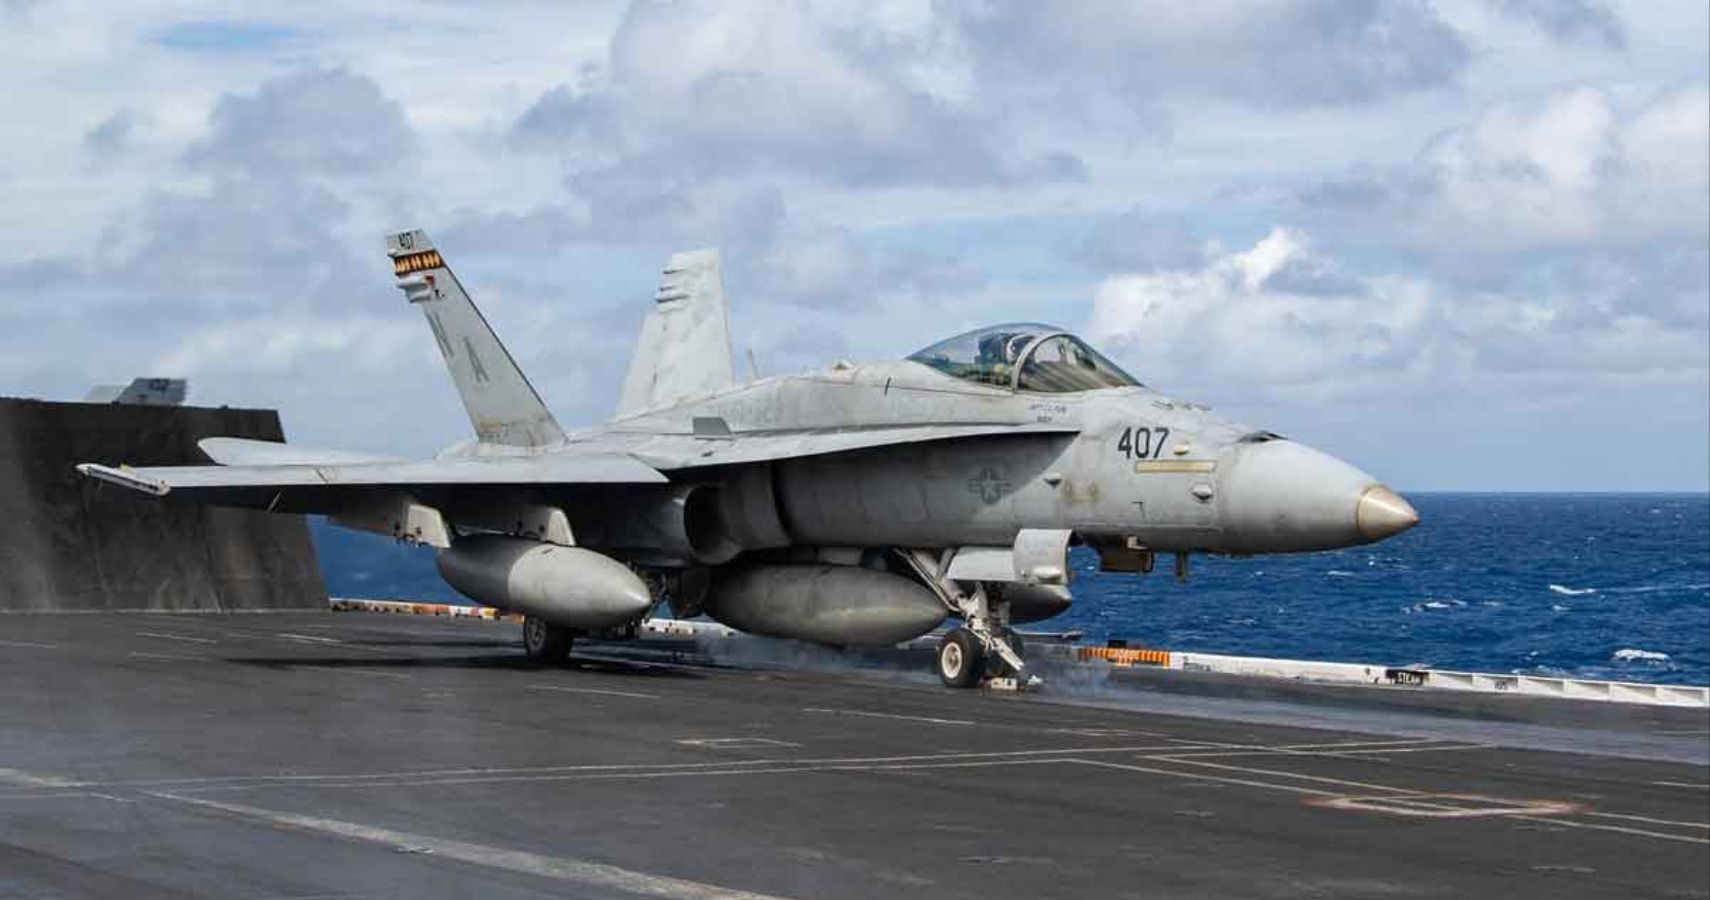 What You Didn’t Know About The F/A-18 Hornet From The Top Gun: Maverick